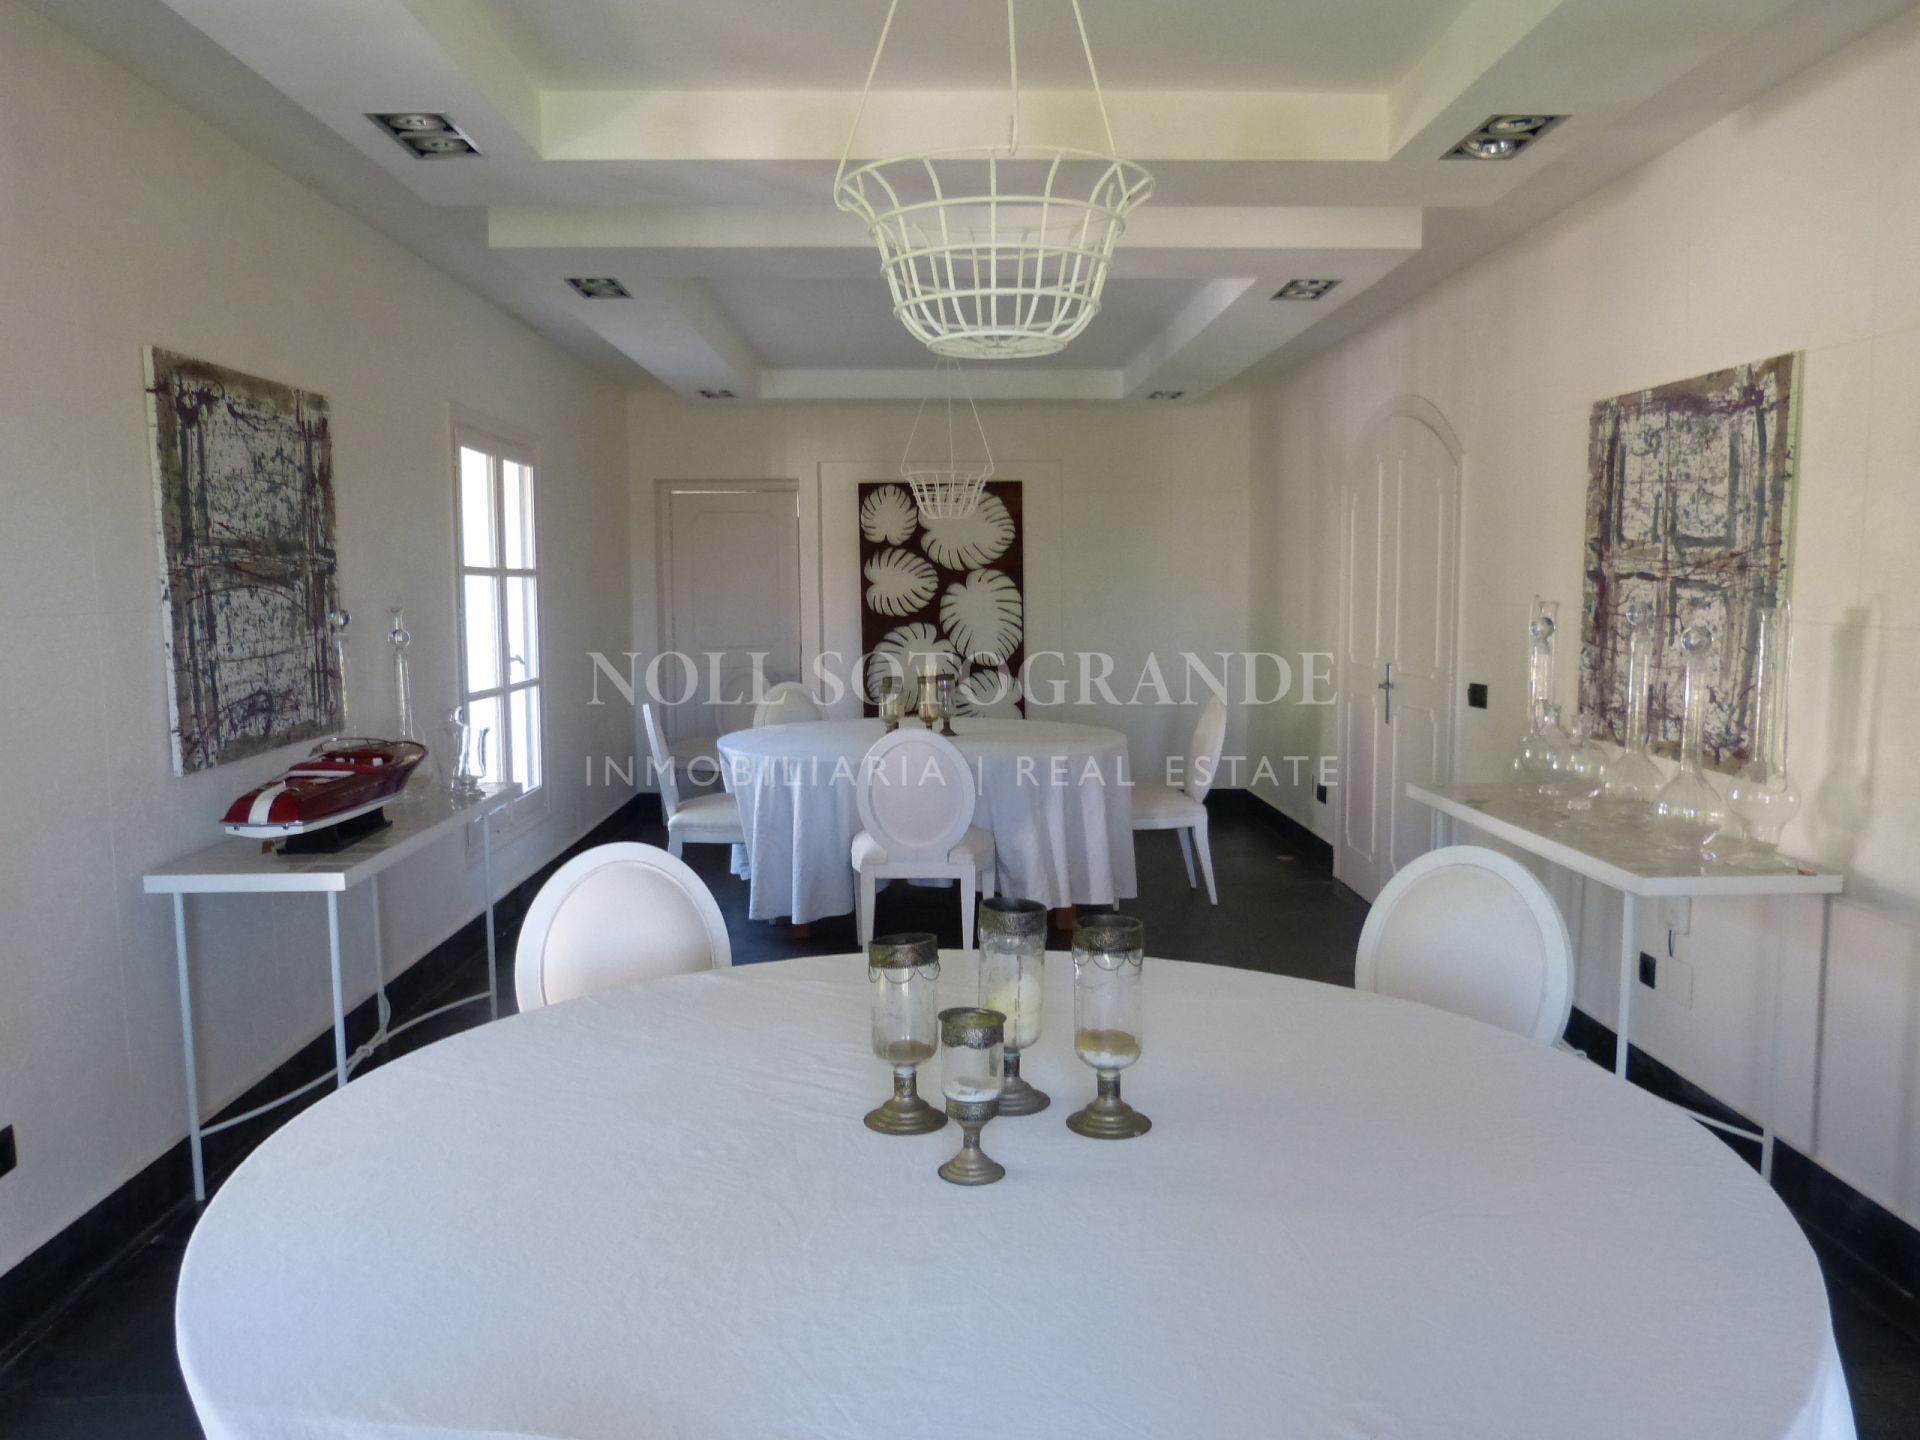 Luxury Villa by the Beach in Sotogrande Costa for rent